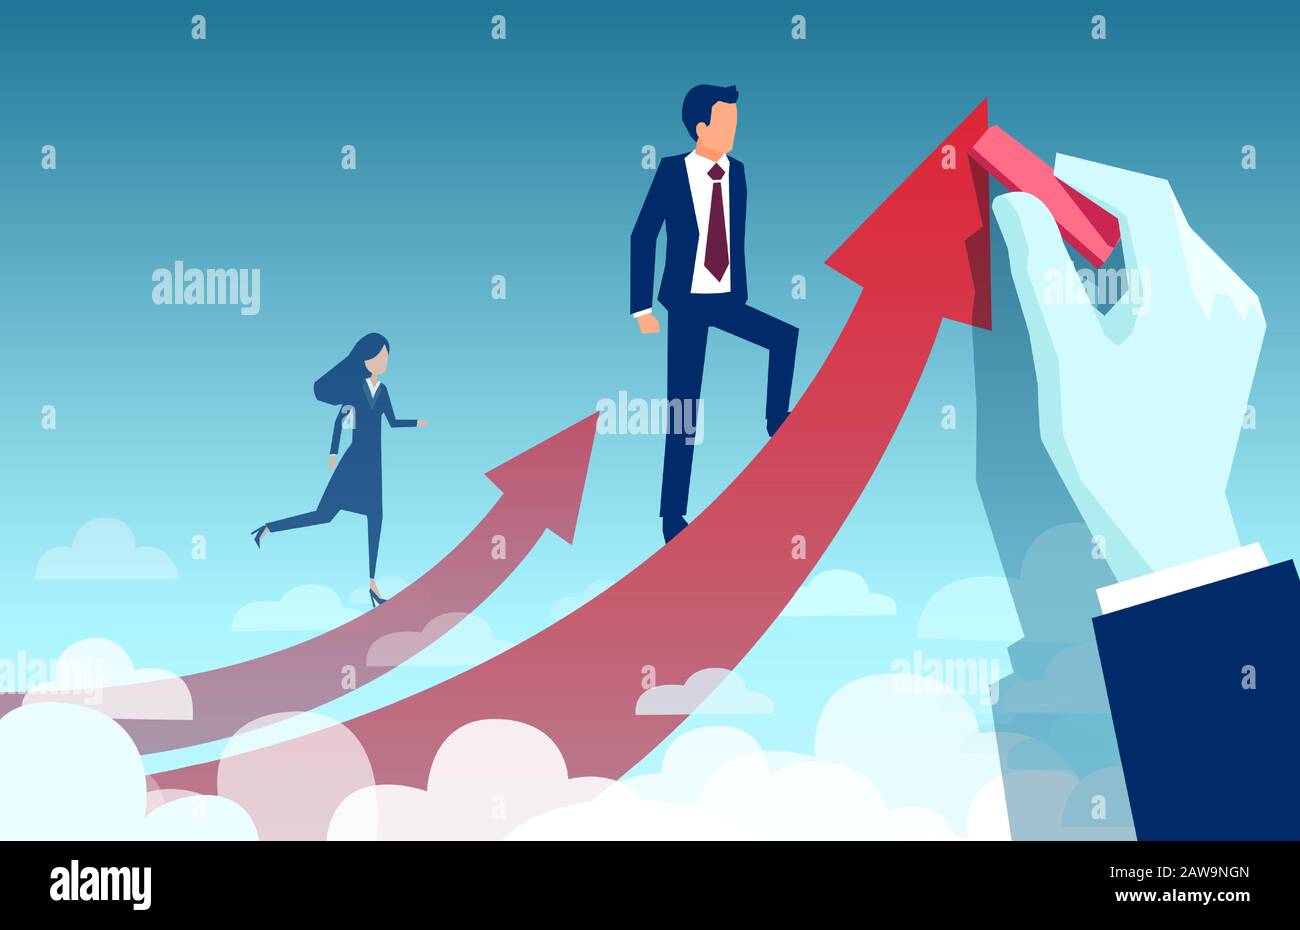 Business gender inequality concept. Vector of a businesswoman climbing up her own career path while businessman being supported by corporate hand Stock Vector